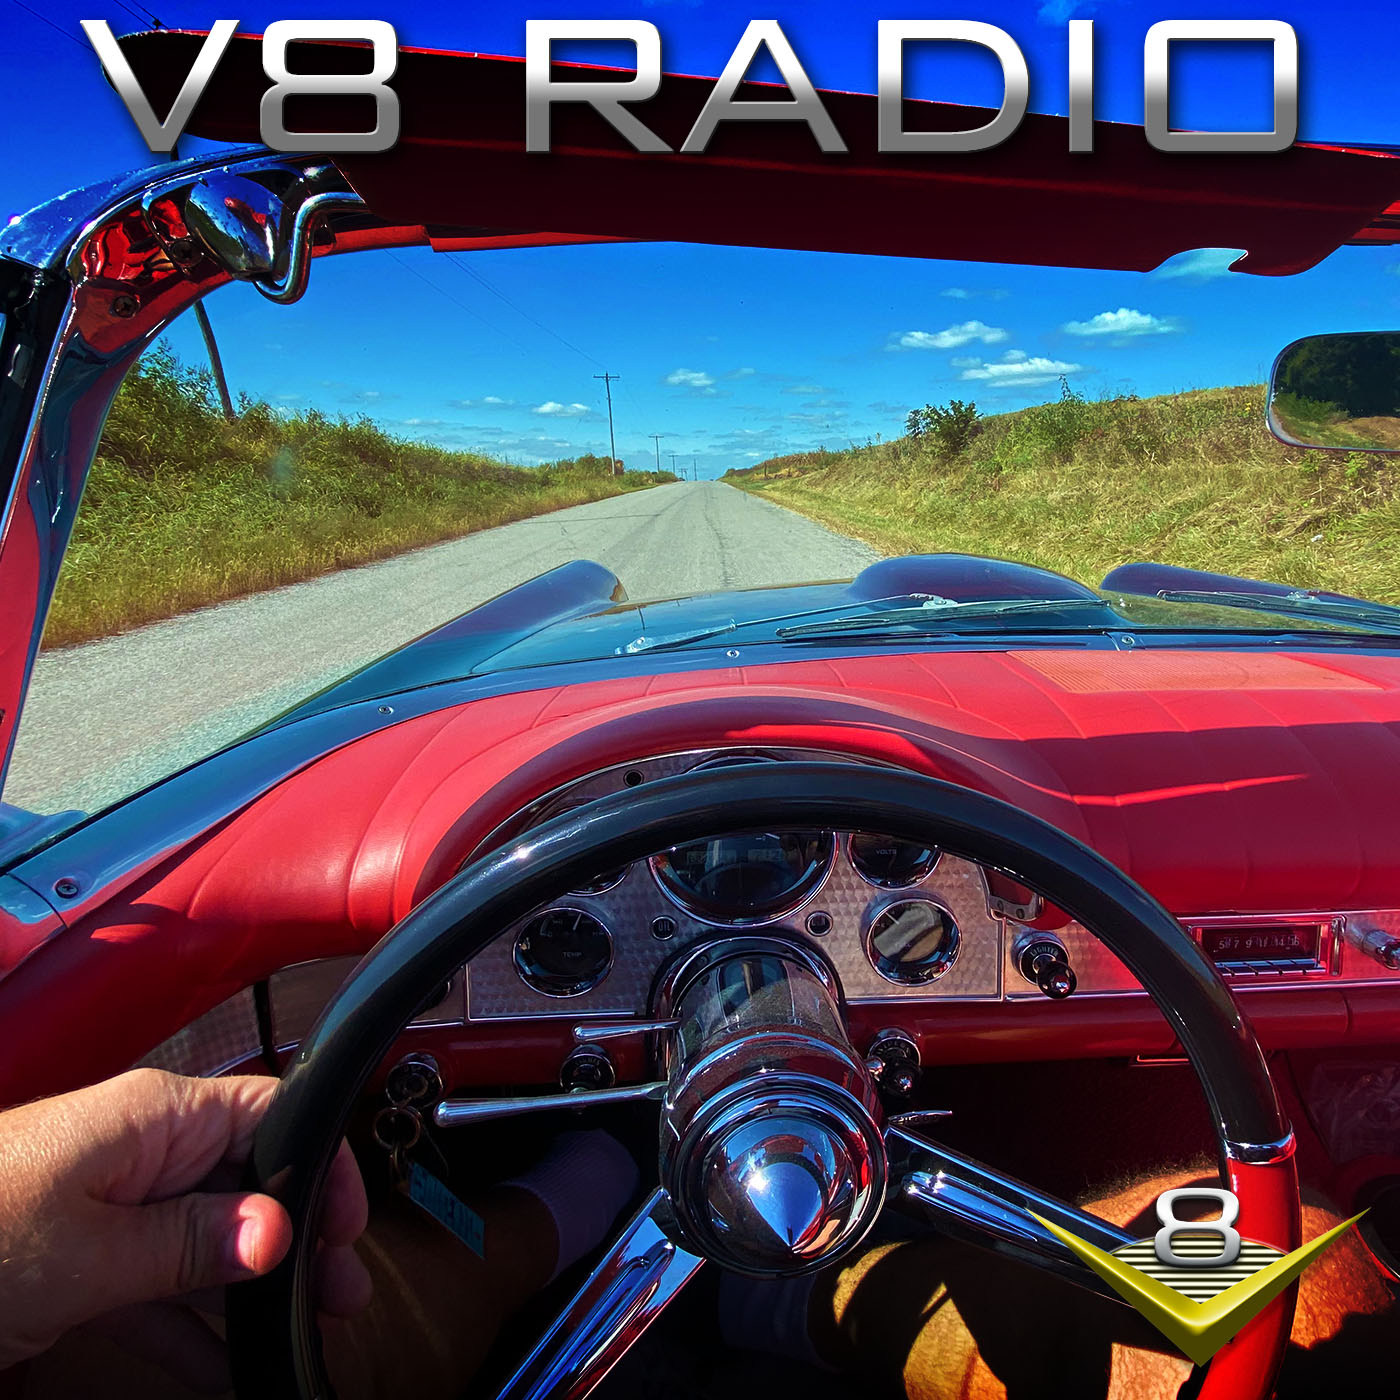 Dialing-In The Tune, Coyote Thunderbird Follow Up, Automotive Trivia, and More on the V8 Radio Podcast